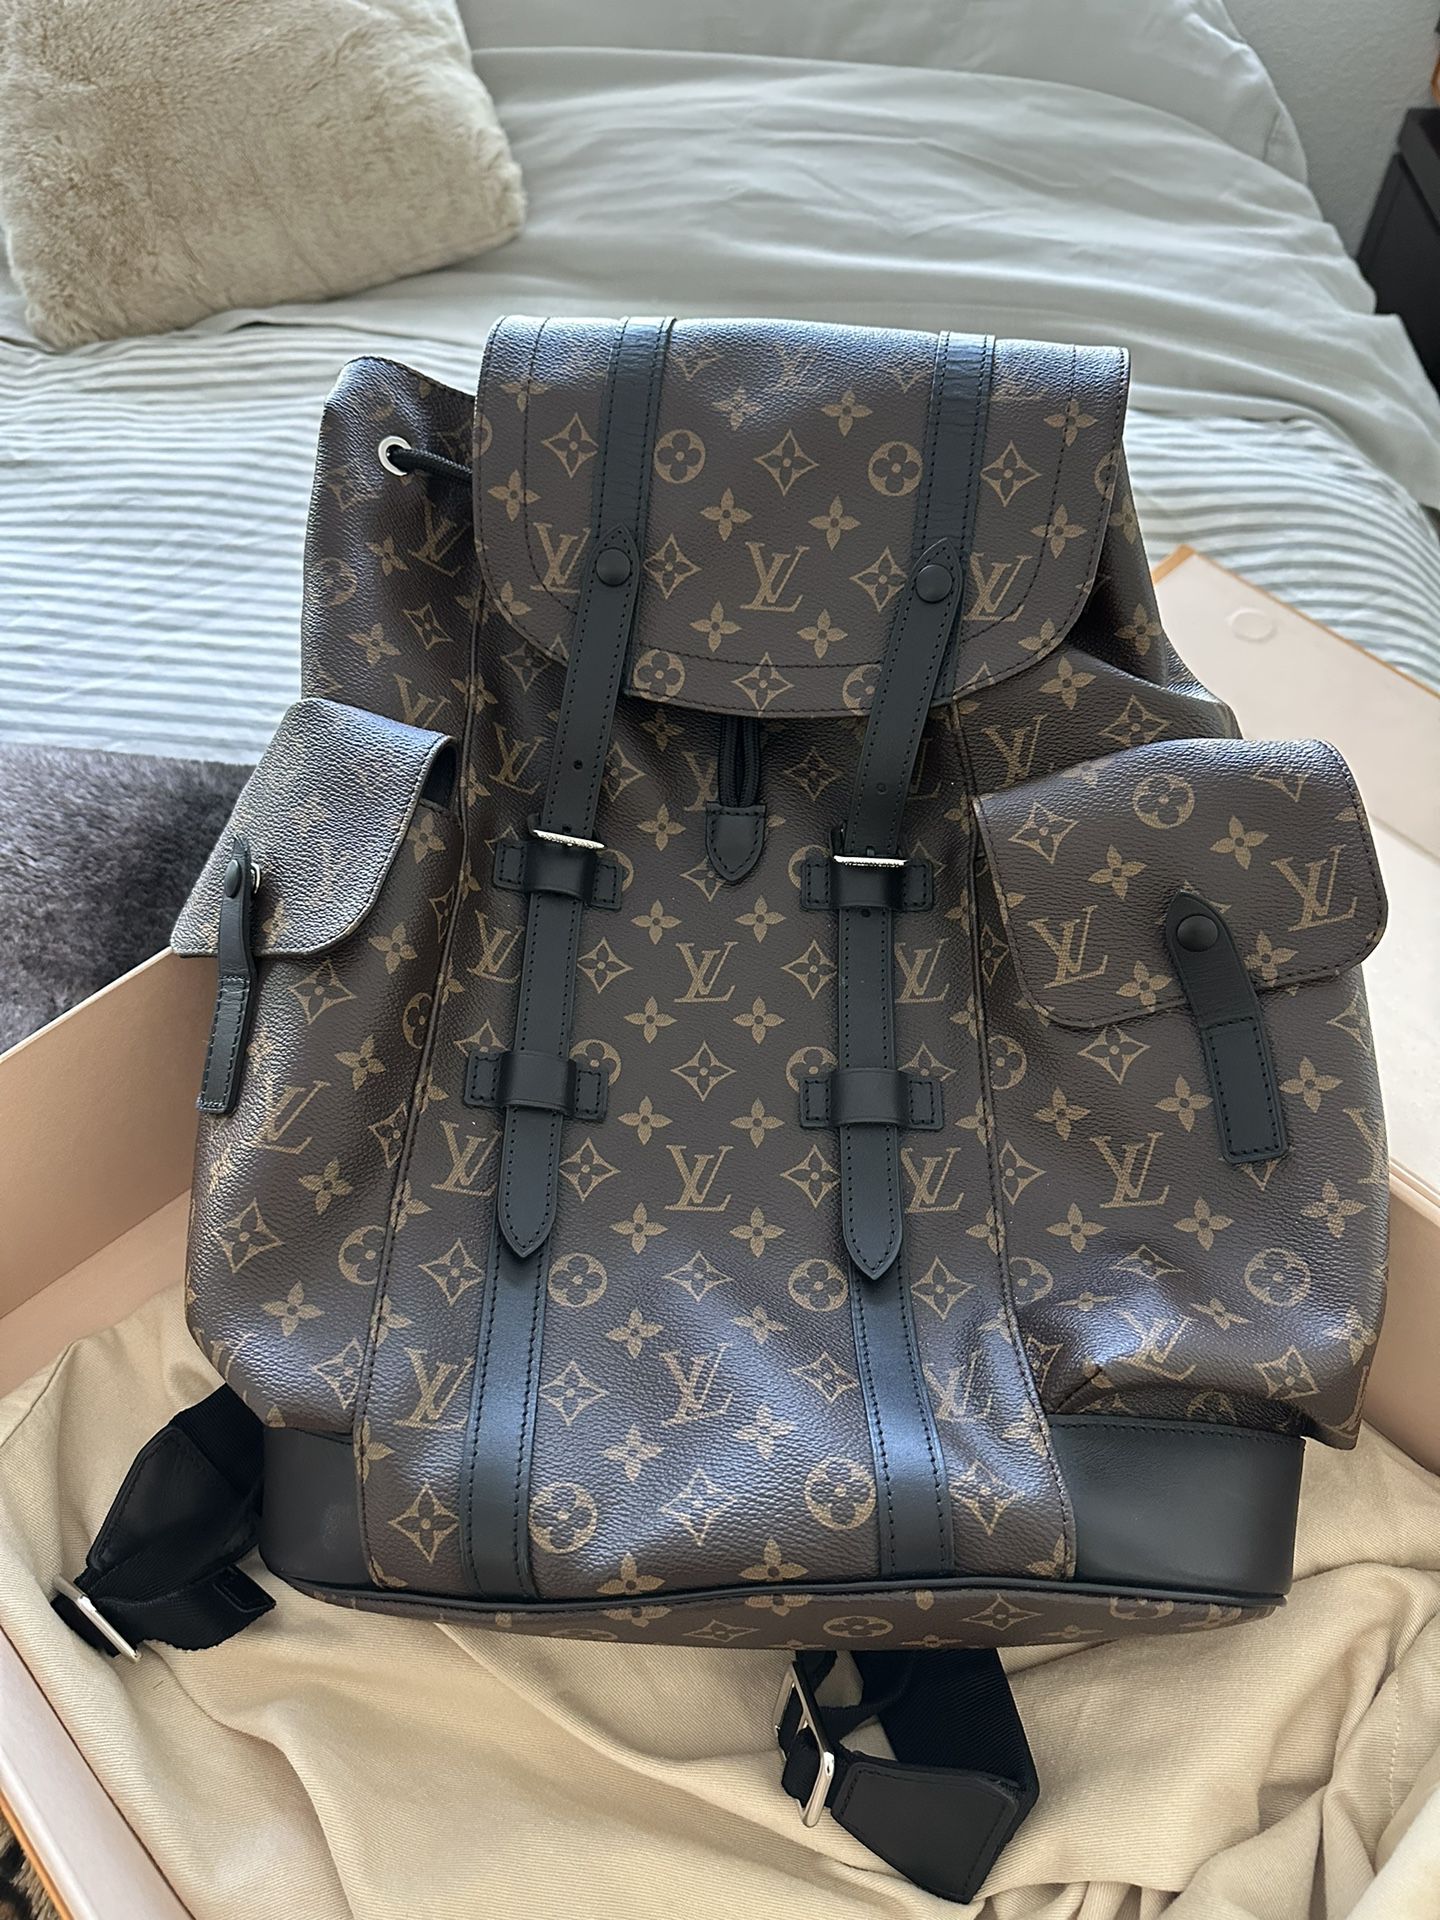 Louis Vuitton Christopher MM for Sale in Reno, NV - OfferUp